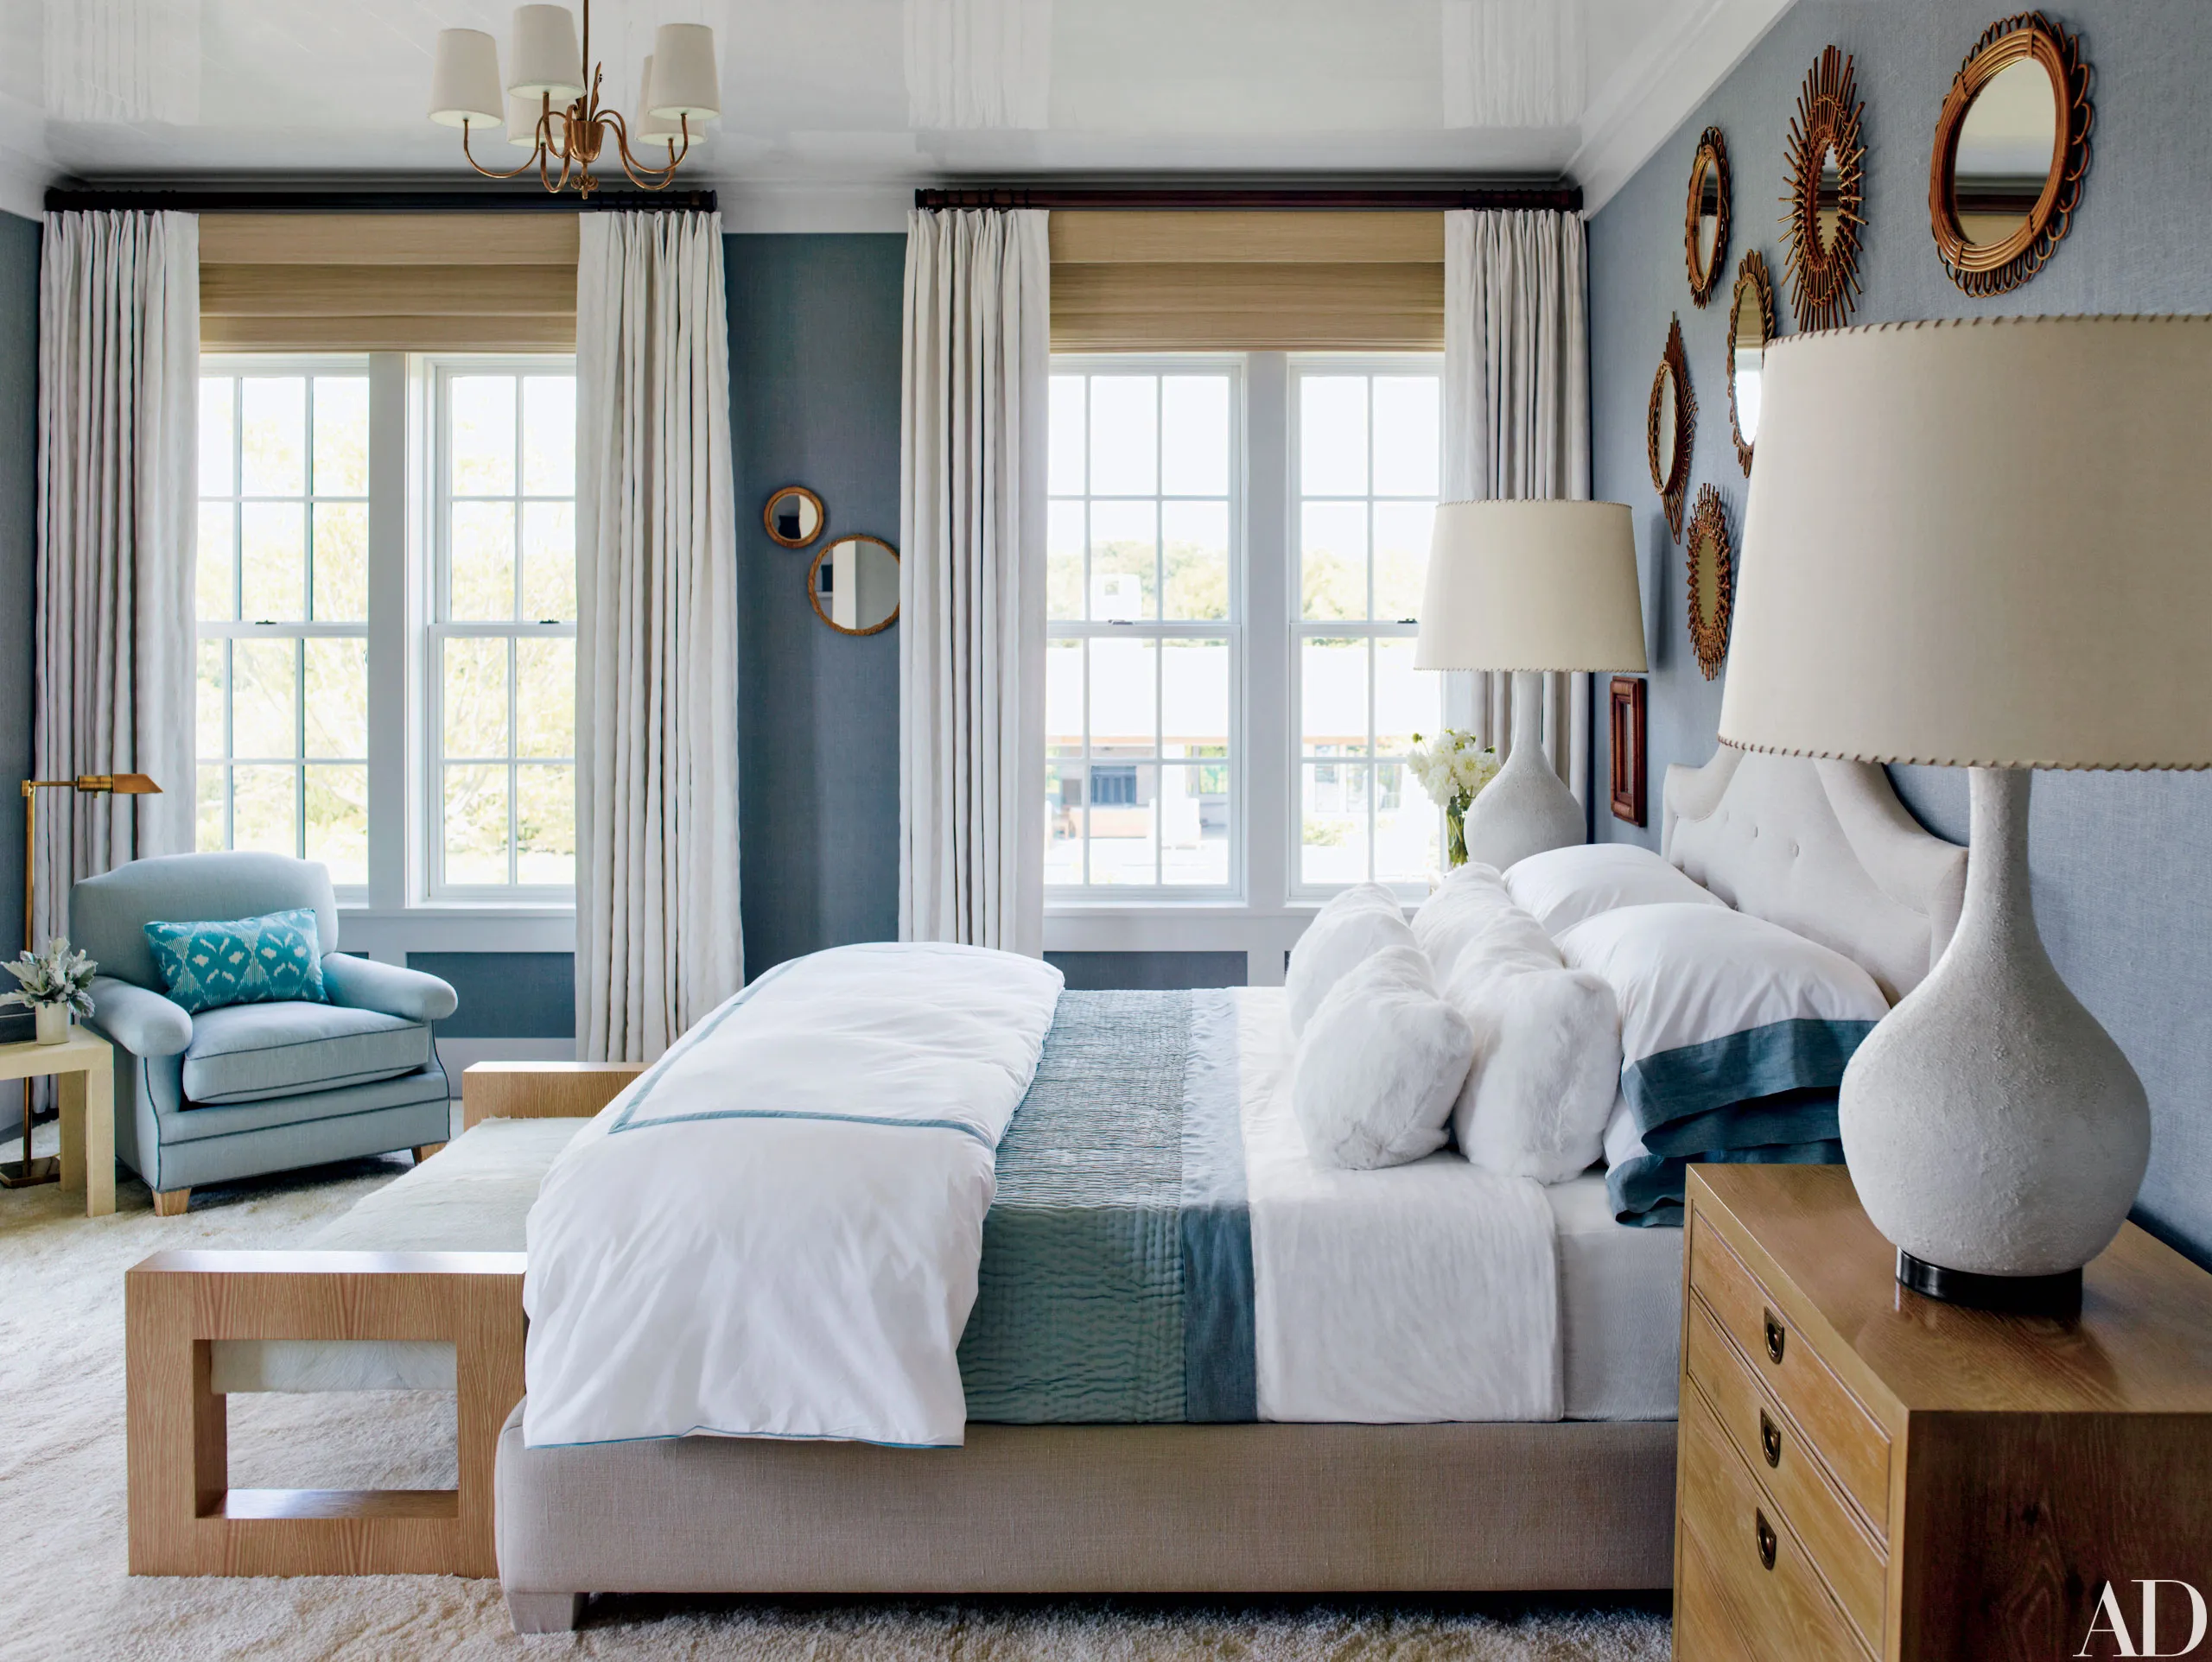 Guest Room Ideas to Make Your Home More Inviting